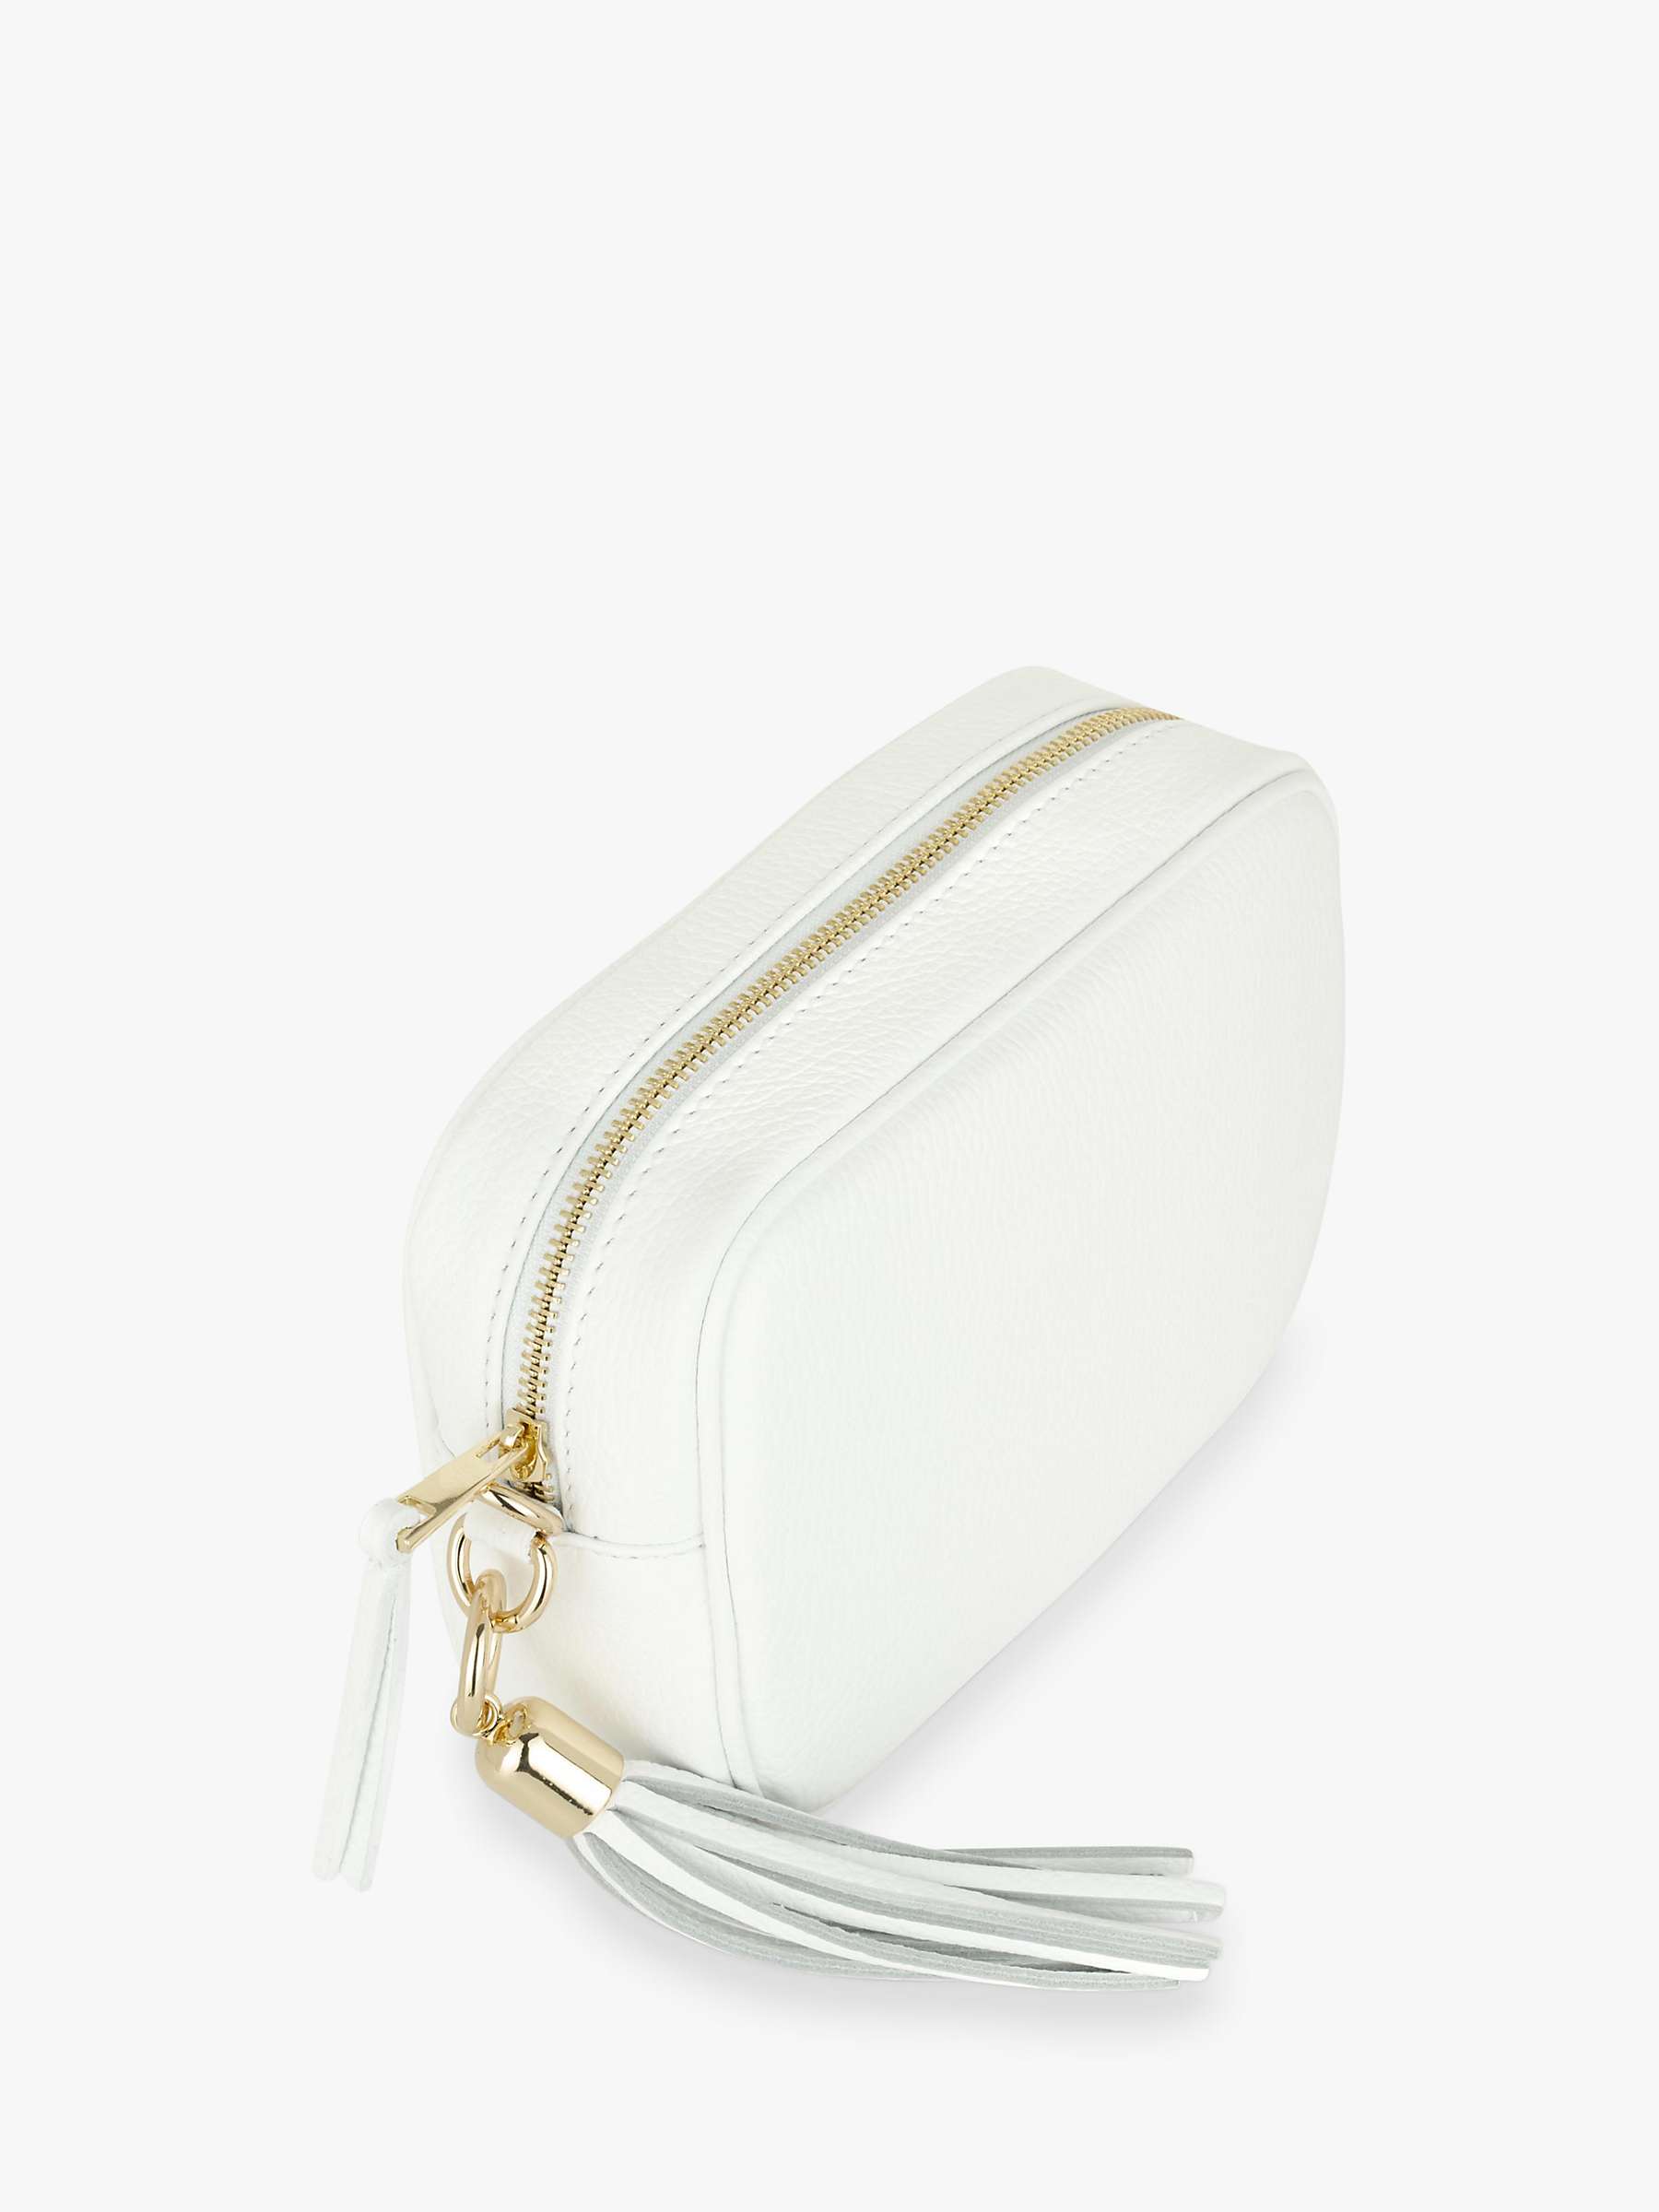 Buy Apatchy Chevron Strap Leather Crossbody Bag Online at johnlewis.com